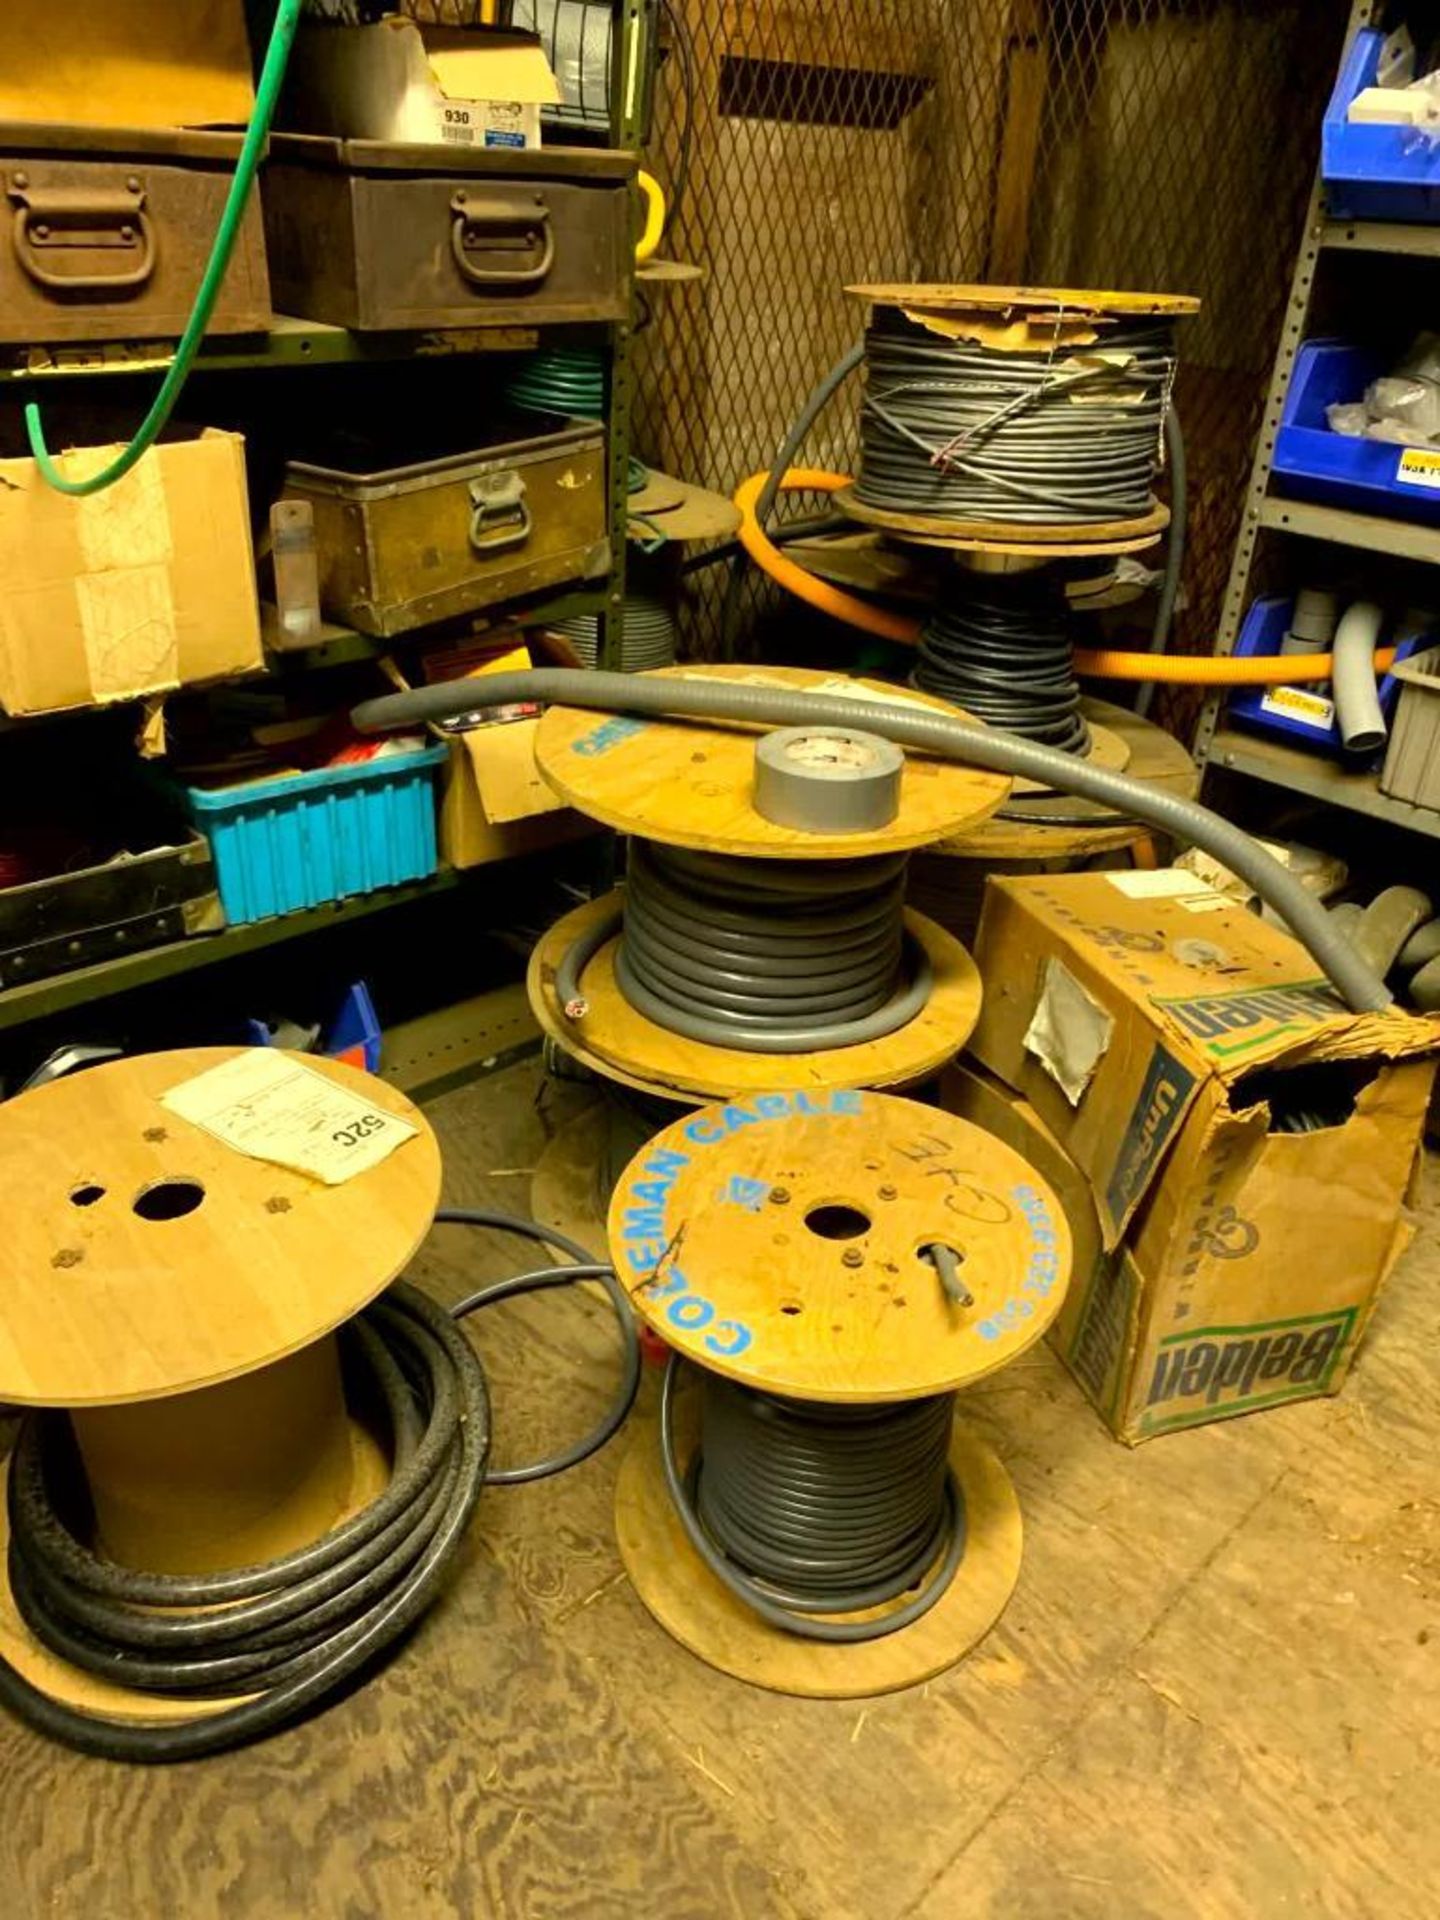 Content of Electrical Supply Room; Spools of Wire, Couplings, Breakers, Fuses, & Much More - Image 10 of 18